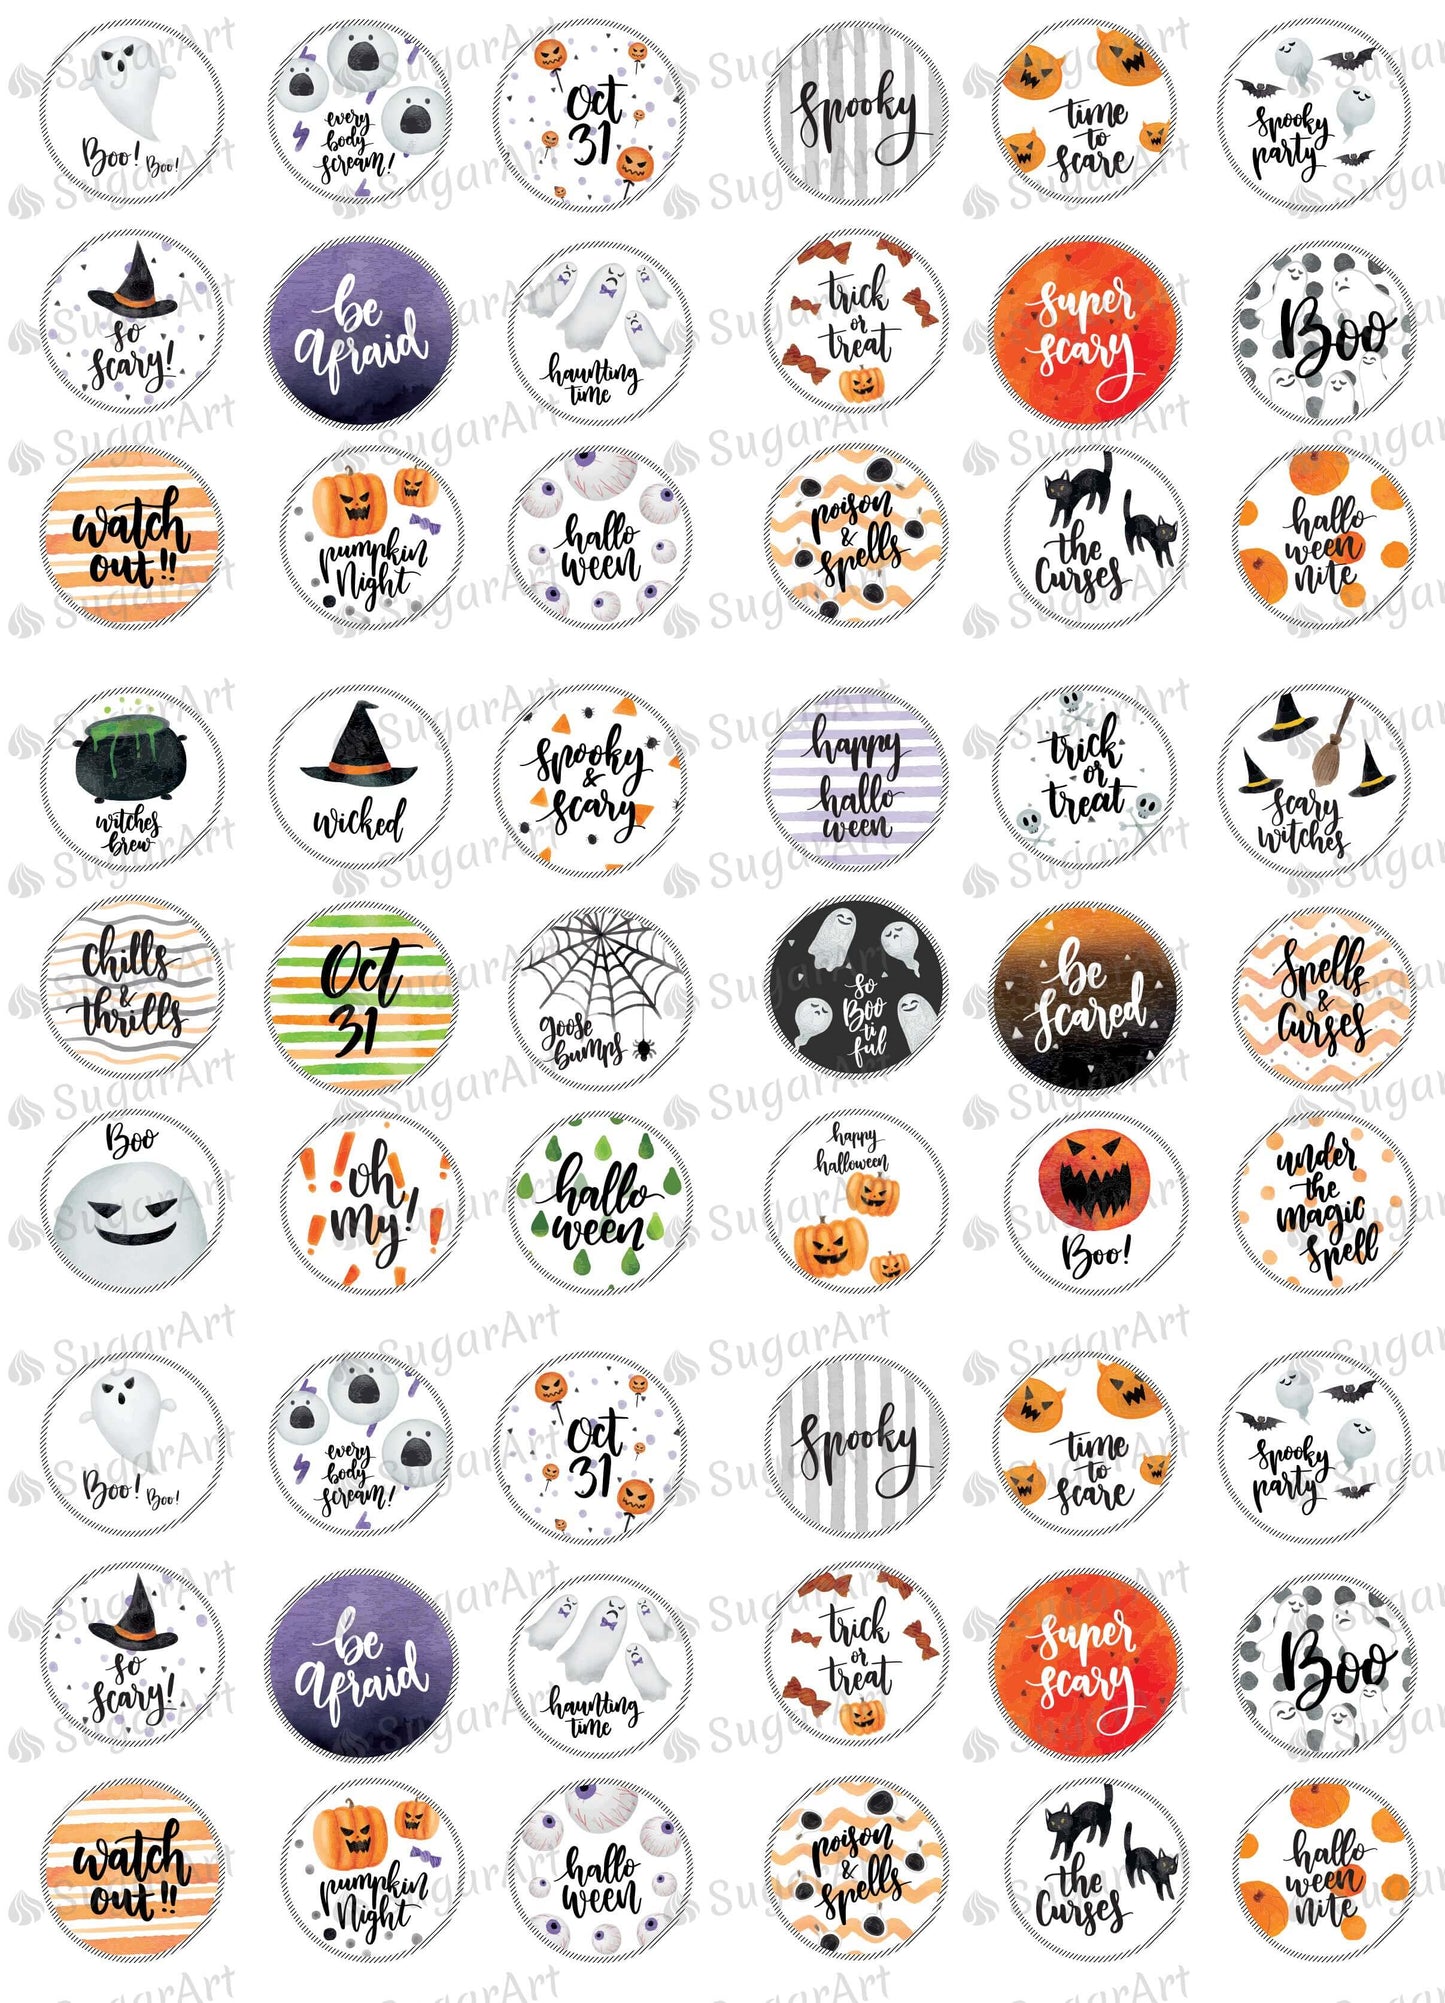 Colorful Set of Watercolor Halloween - HSA068.